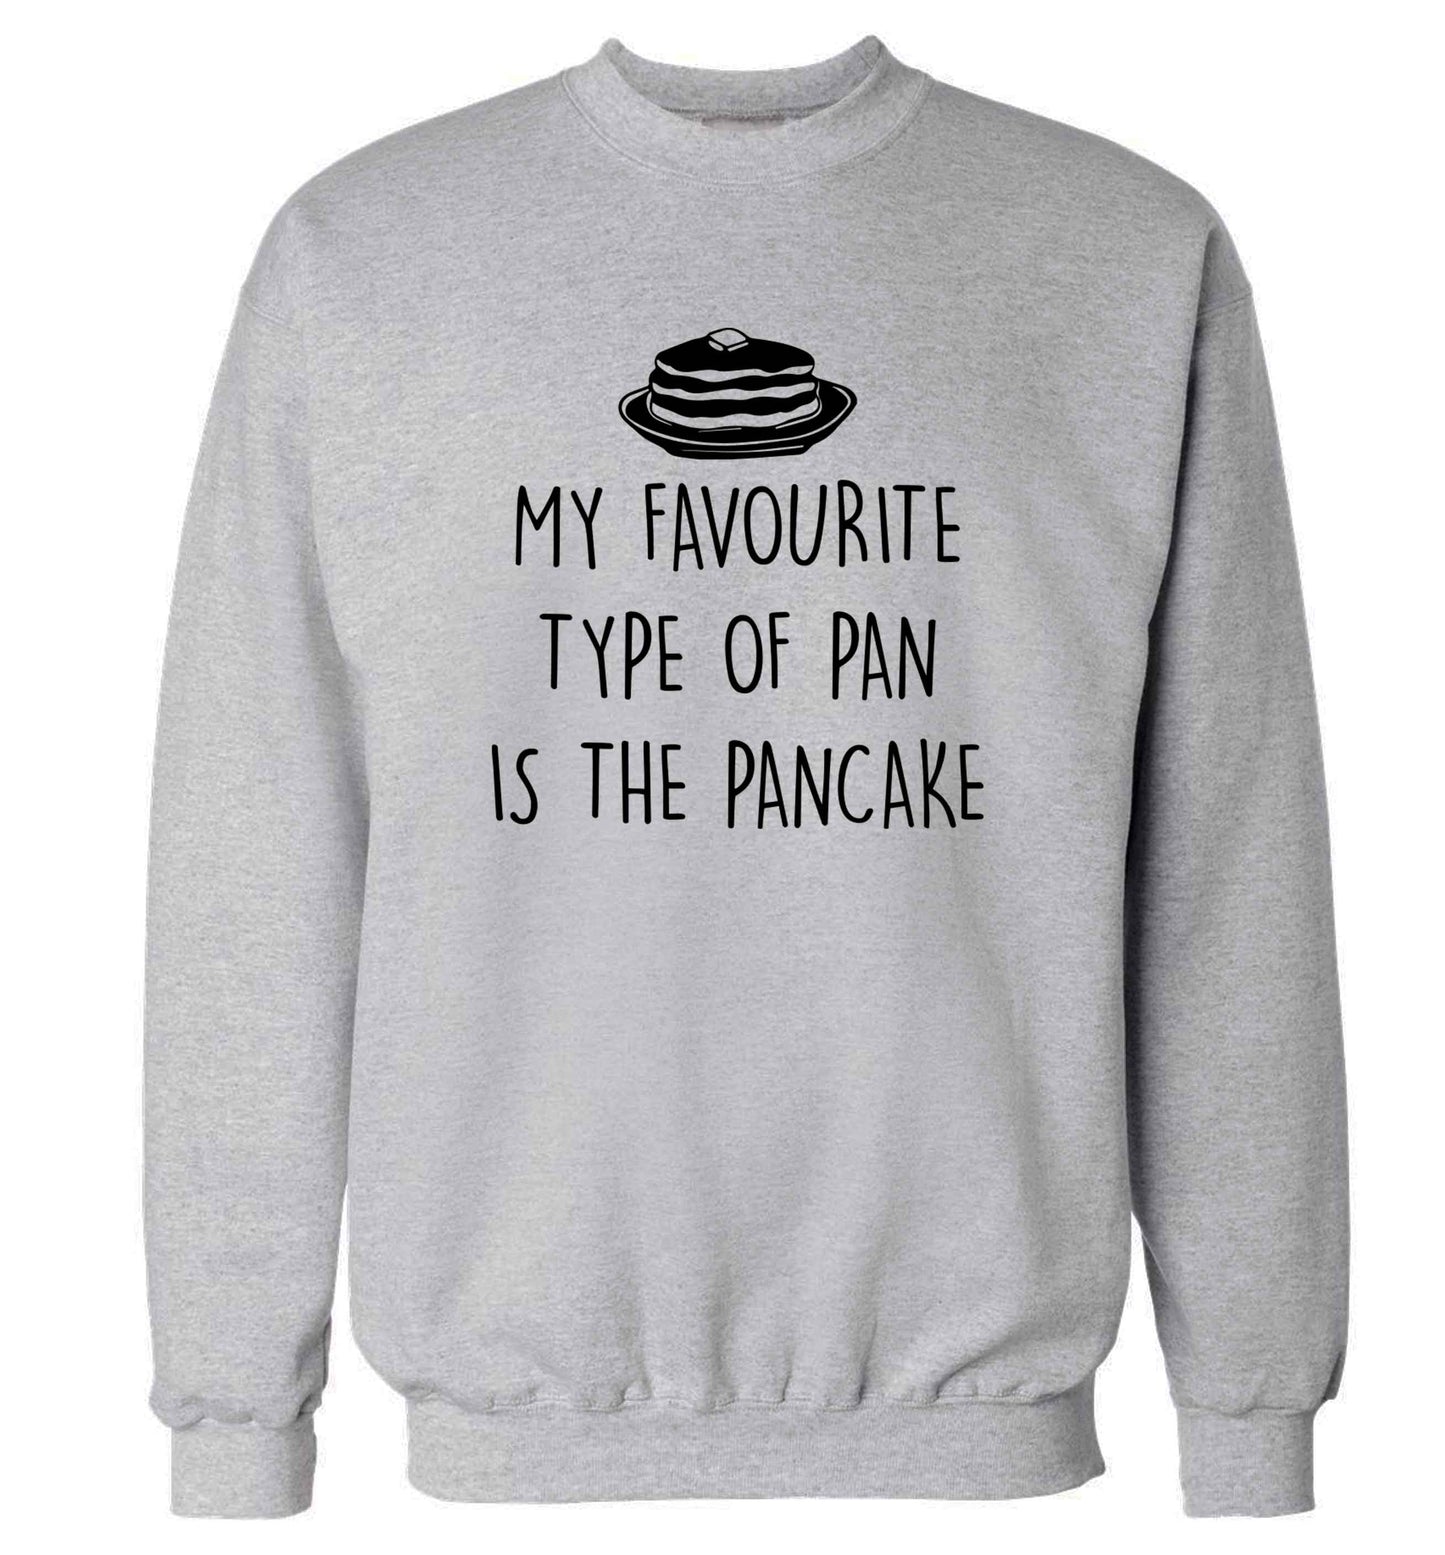 My favourite type of pan is the pancake adult's unisex grey sweater 2XL